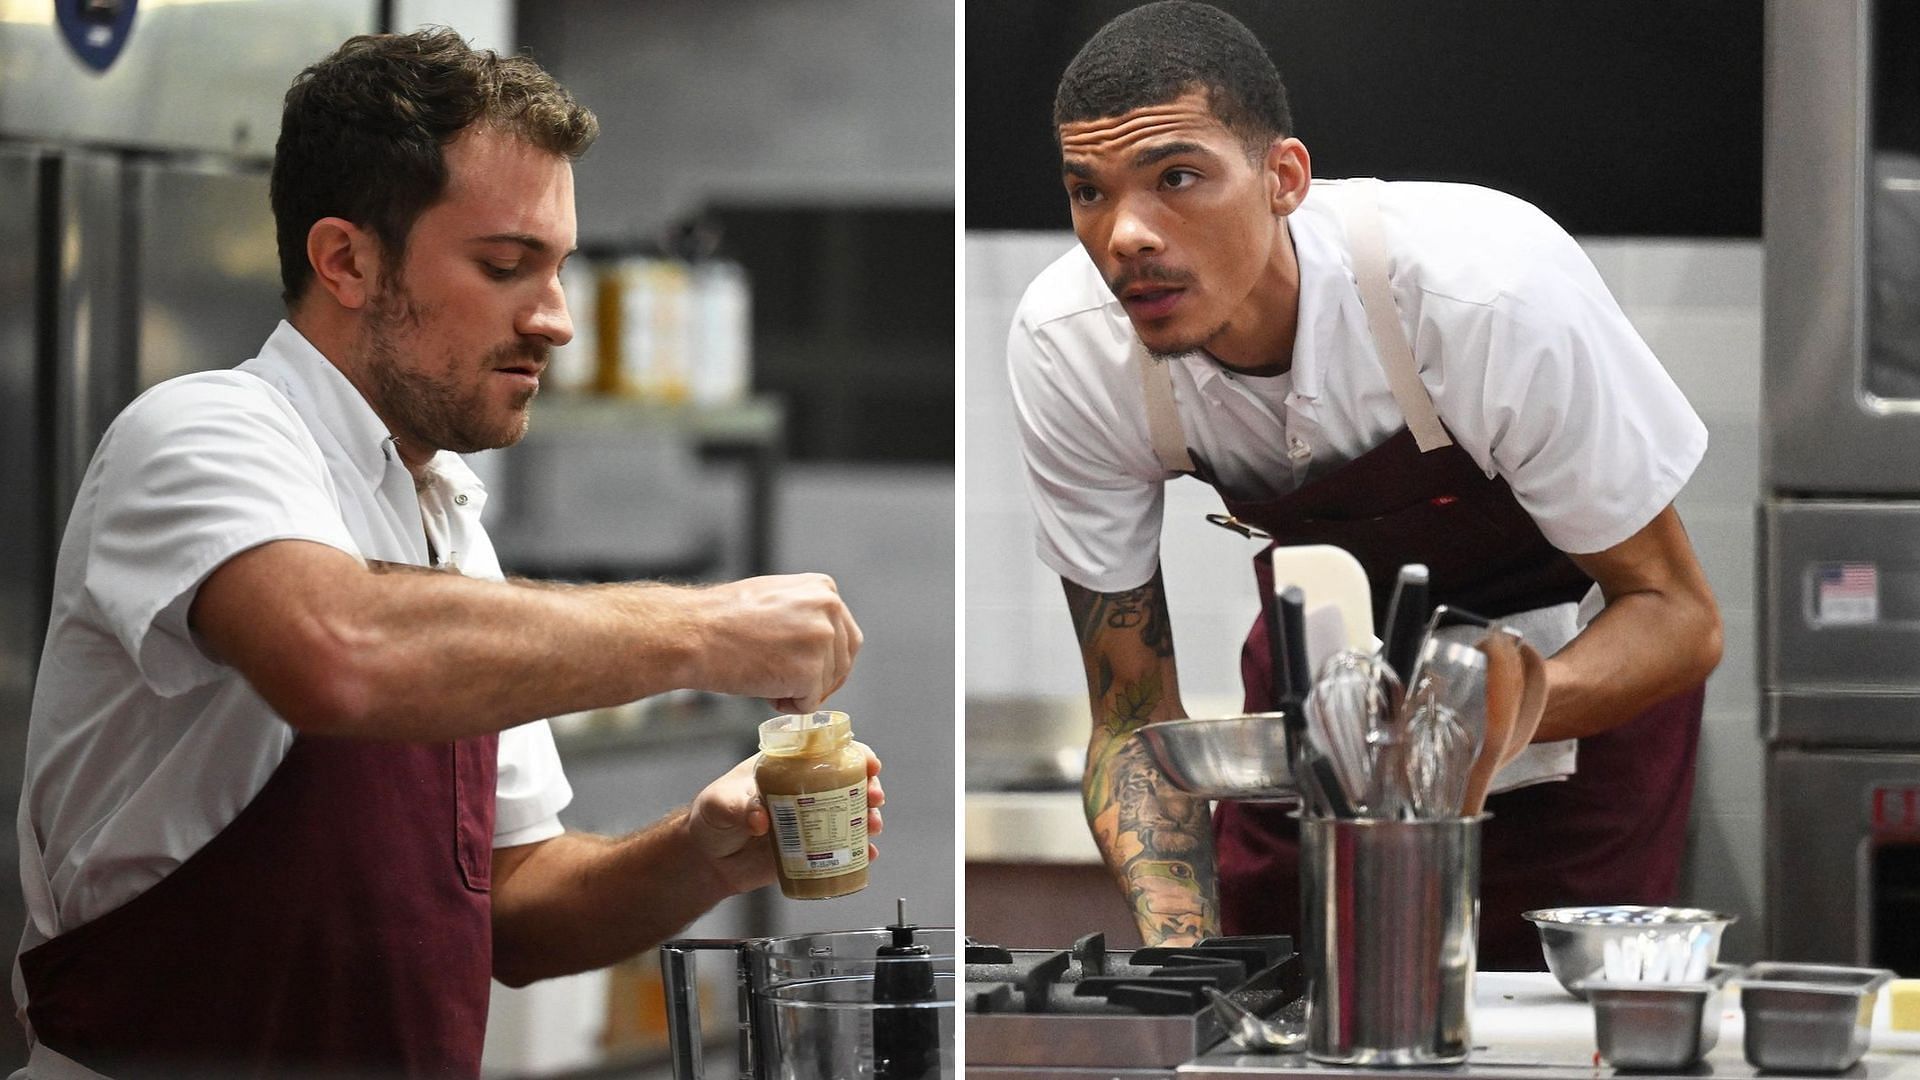 Next Level Chef season 2 saw yet another elimination this week